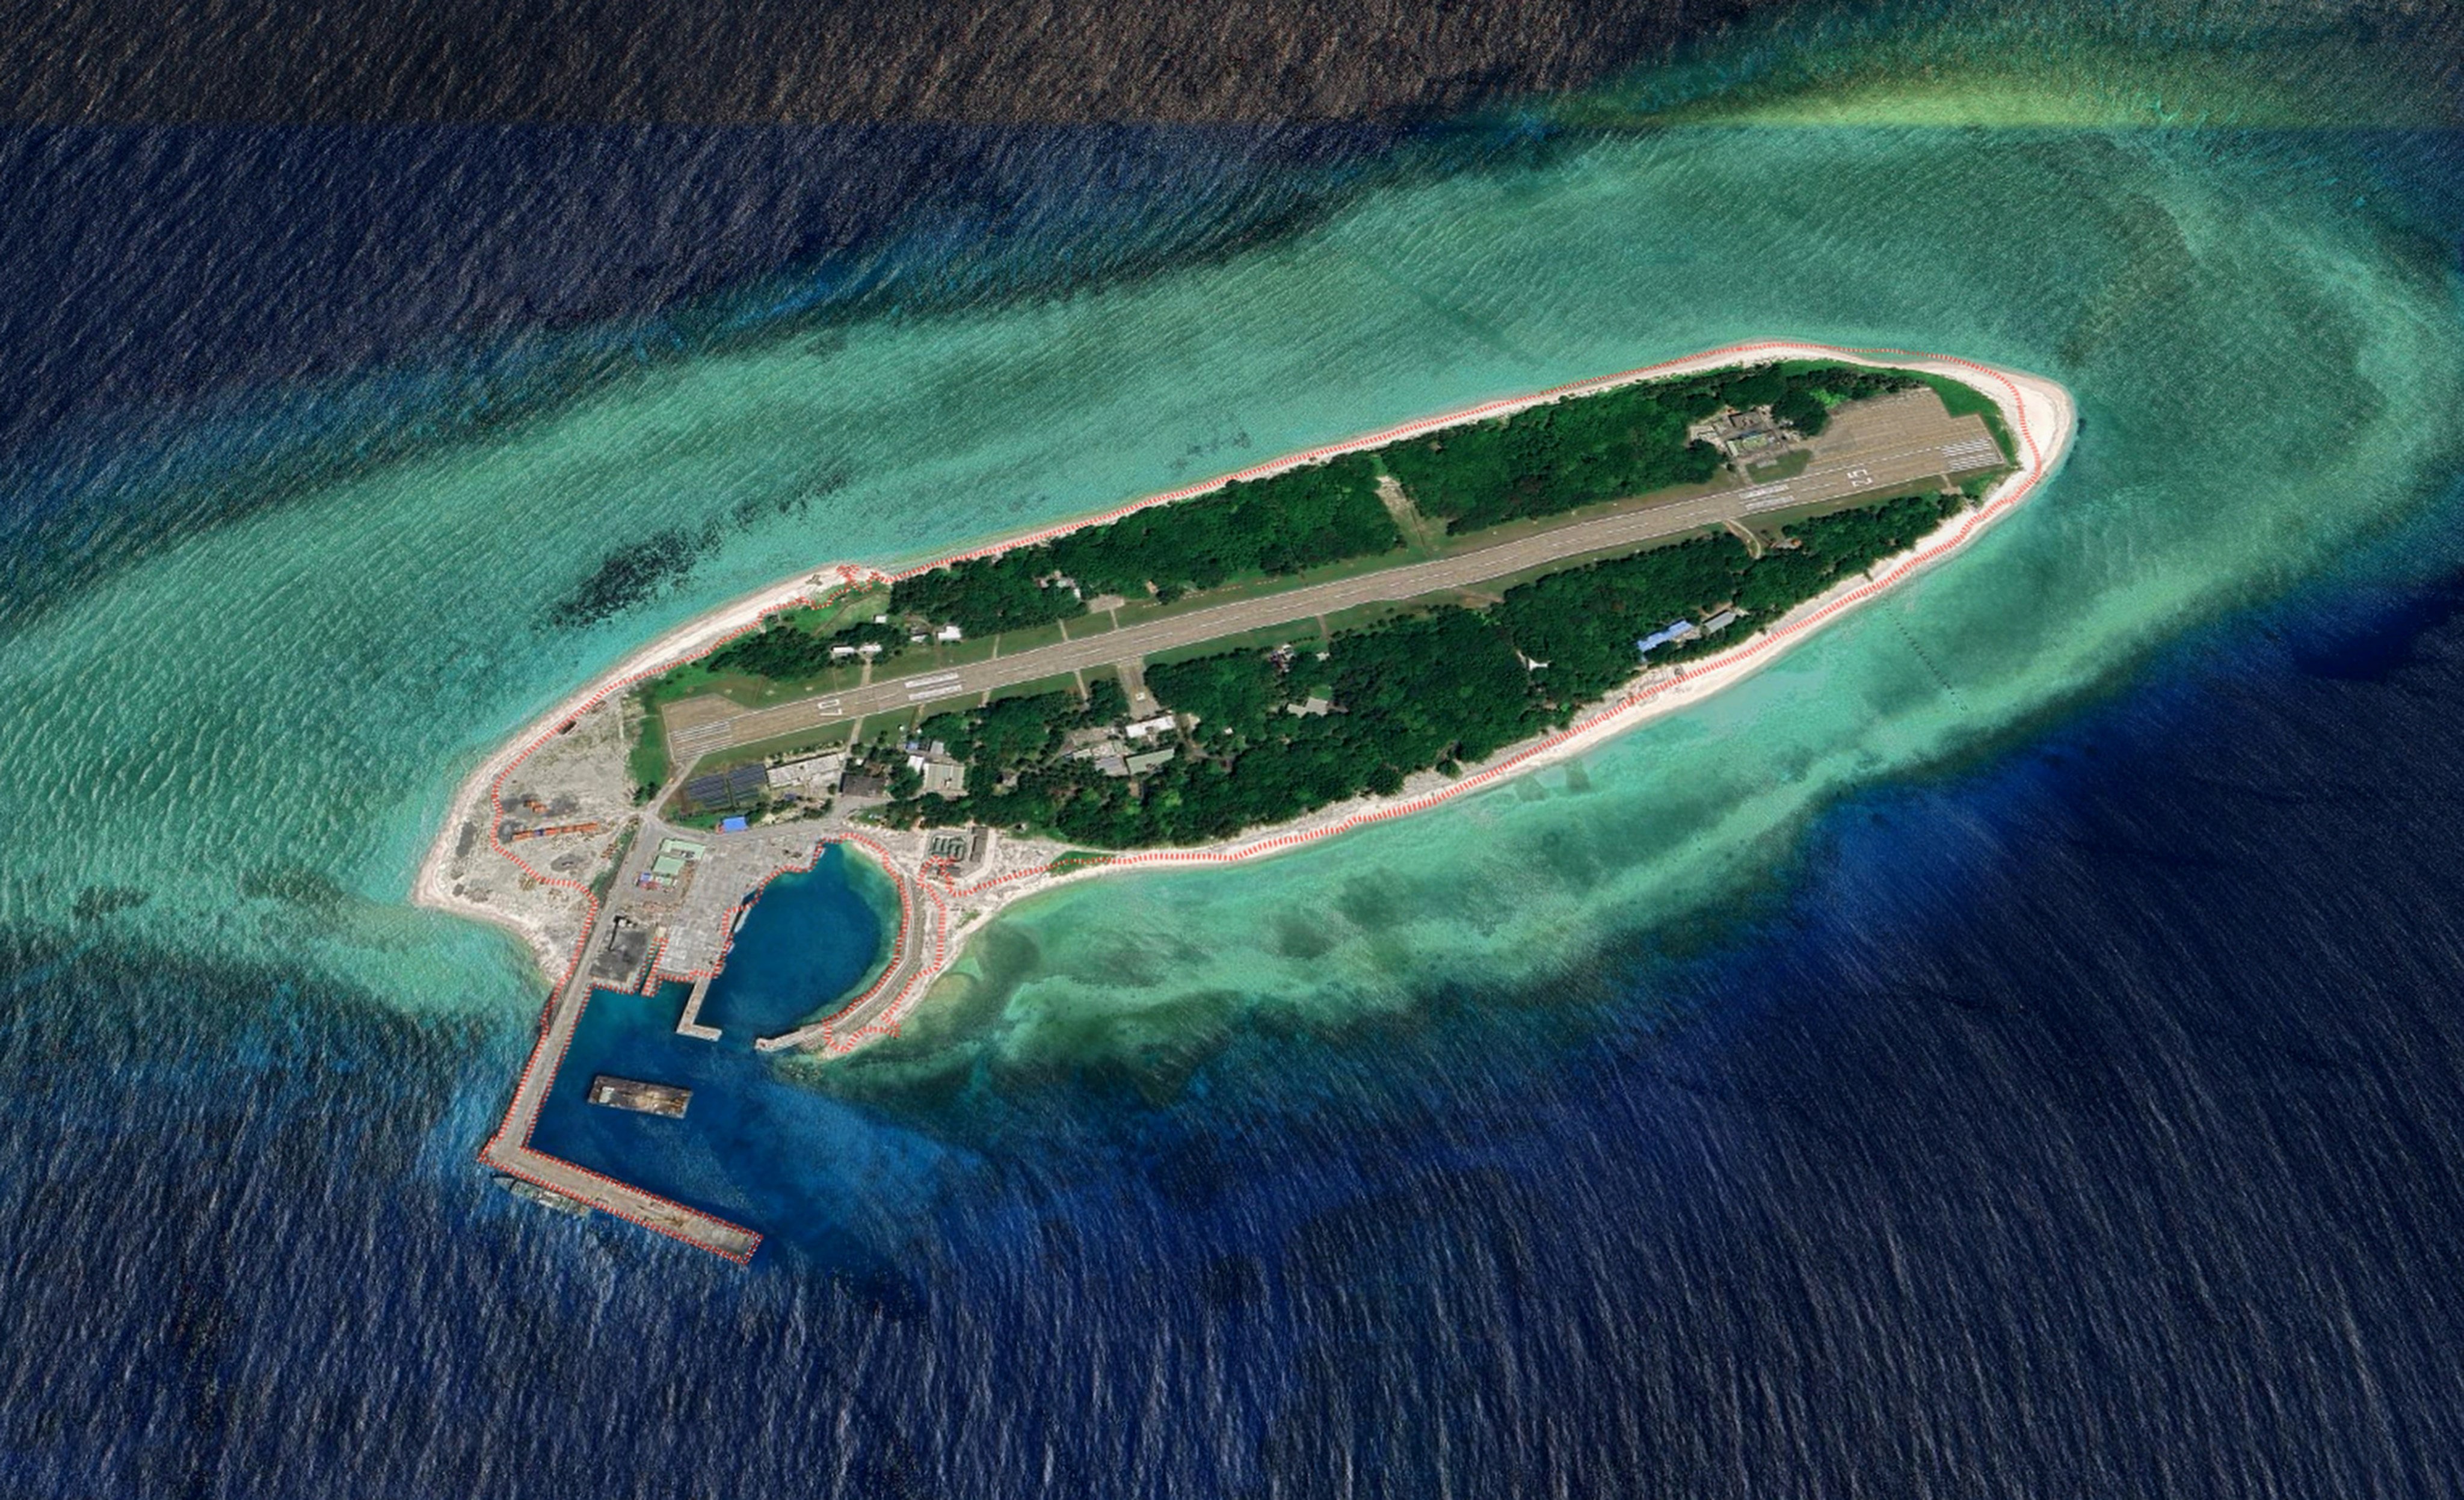 Taiwan spent US$53 million upgrading a pier on Taiping islet in the Spratly Islands to include typhoon-proof facility for the inner pier to accommodate vessels as large as 4,000-tonne military frigates. Photo: Google map